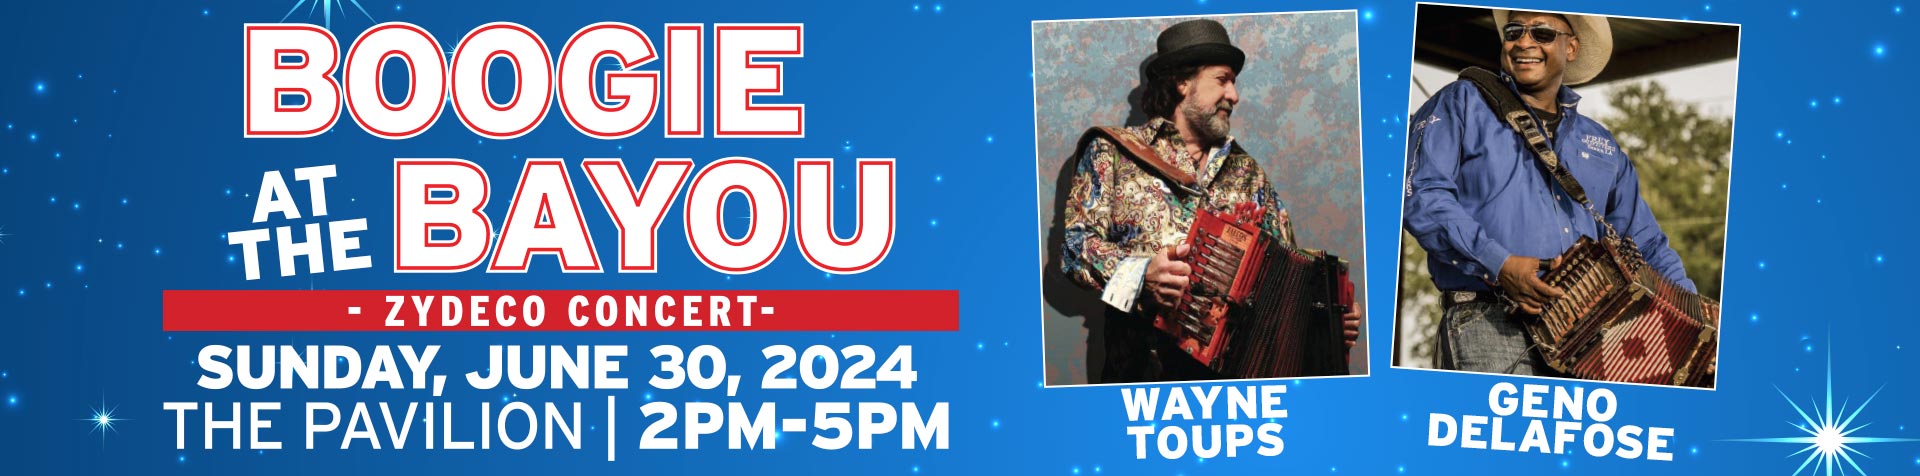 Entertainment - Boogie at the Bayou June 2024